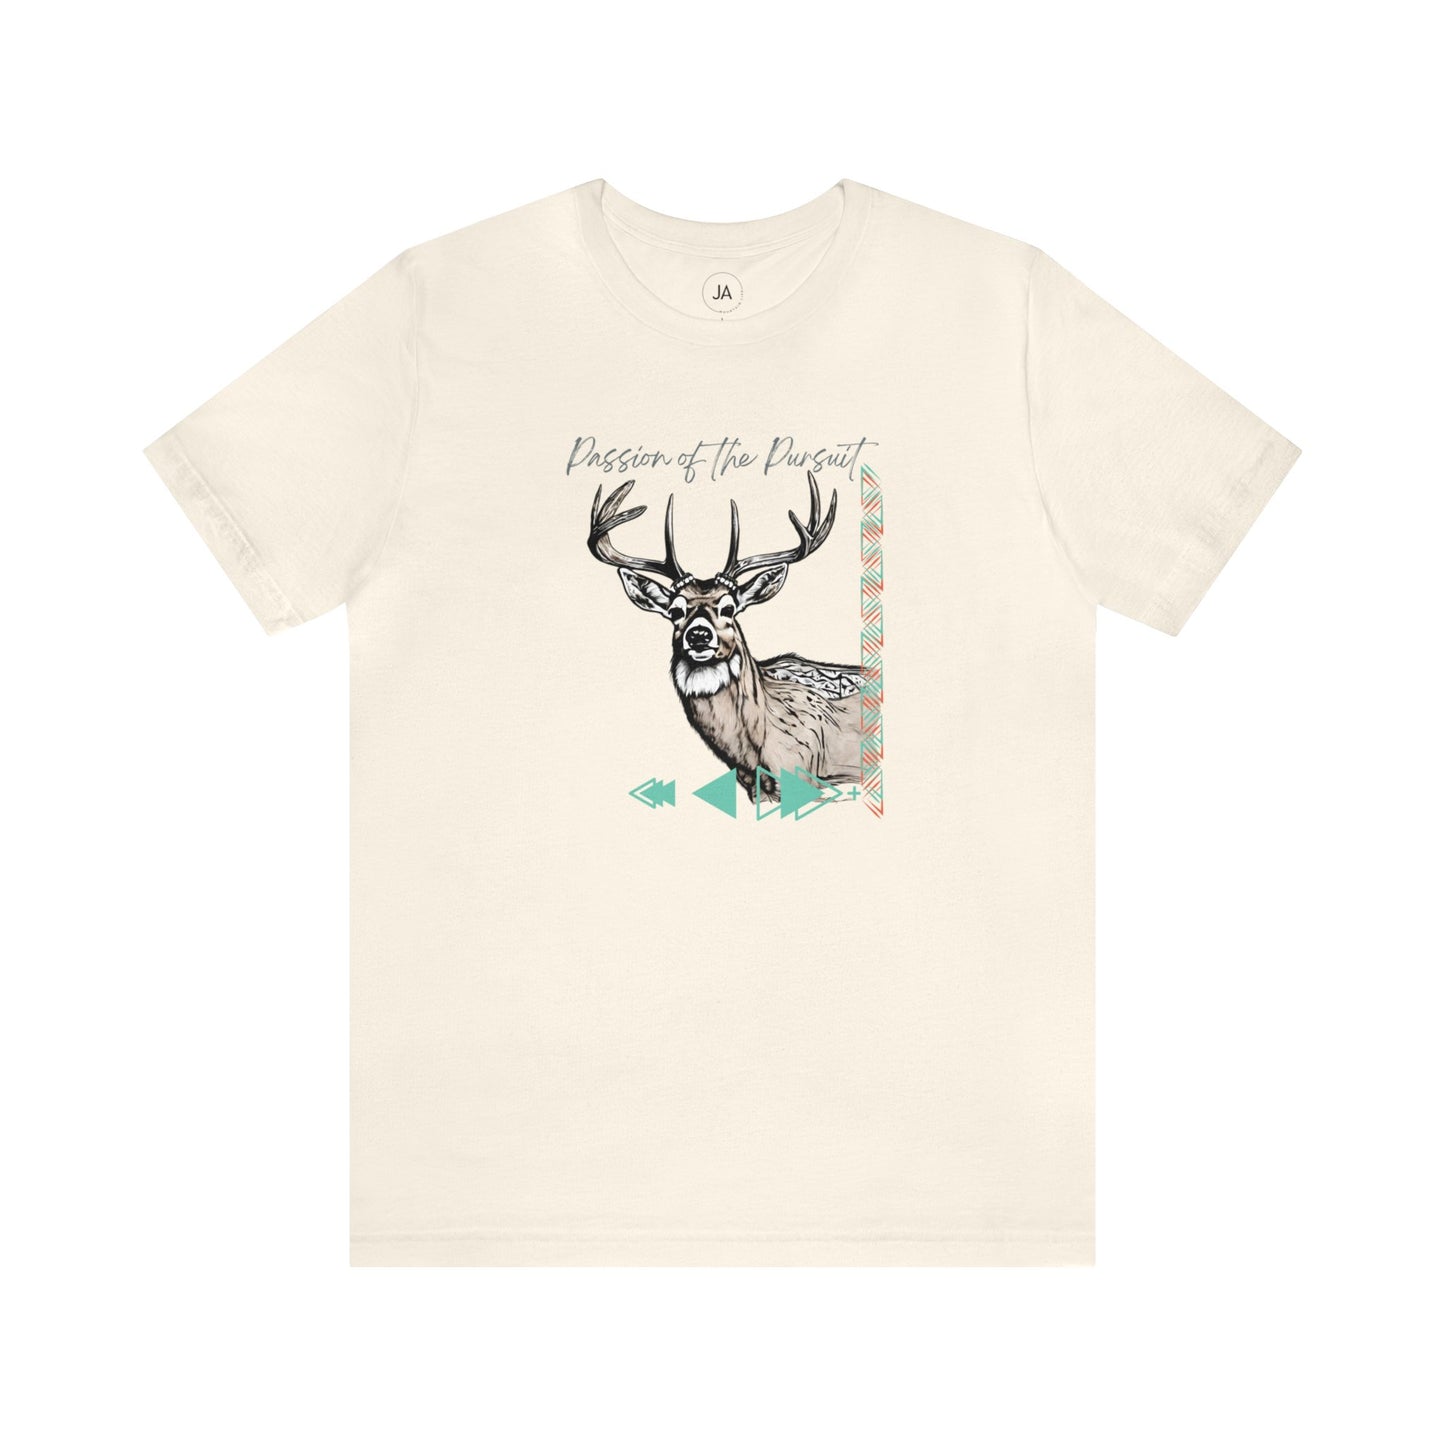 Buck Passion of the Pursuit Tee